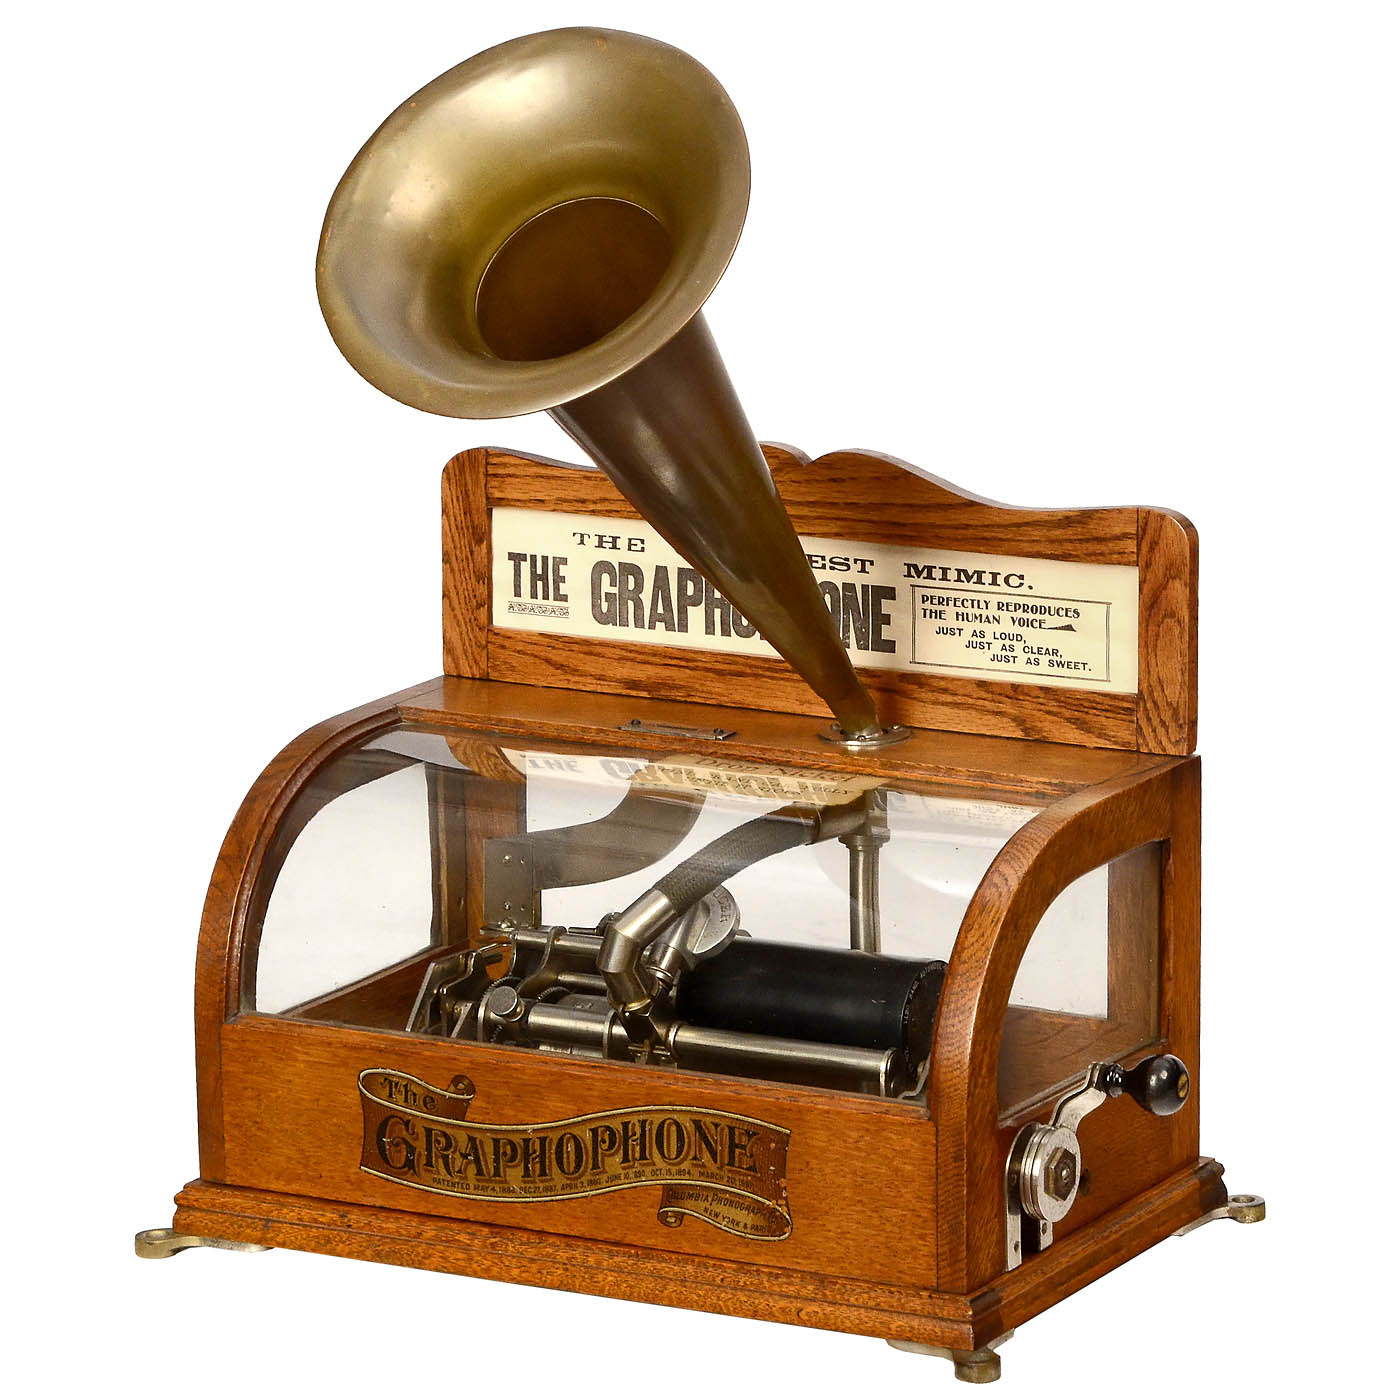 5-Cent Columbia Graphophone Model BS Coin-Operated Phonograph, c. 1898 - Image 2 of 4